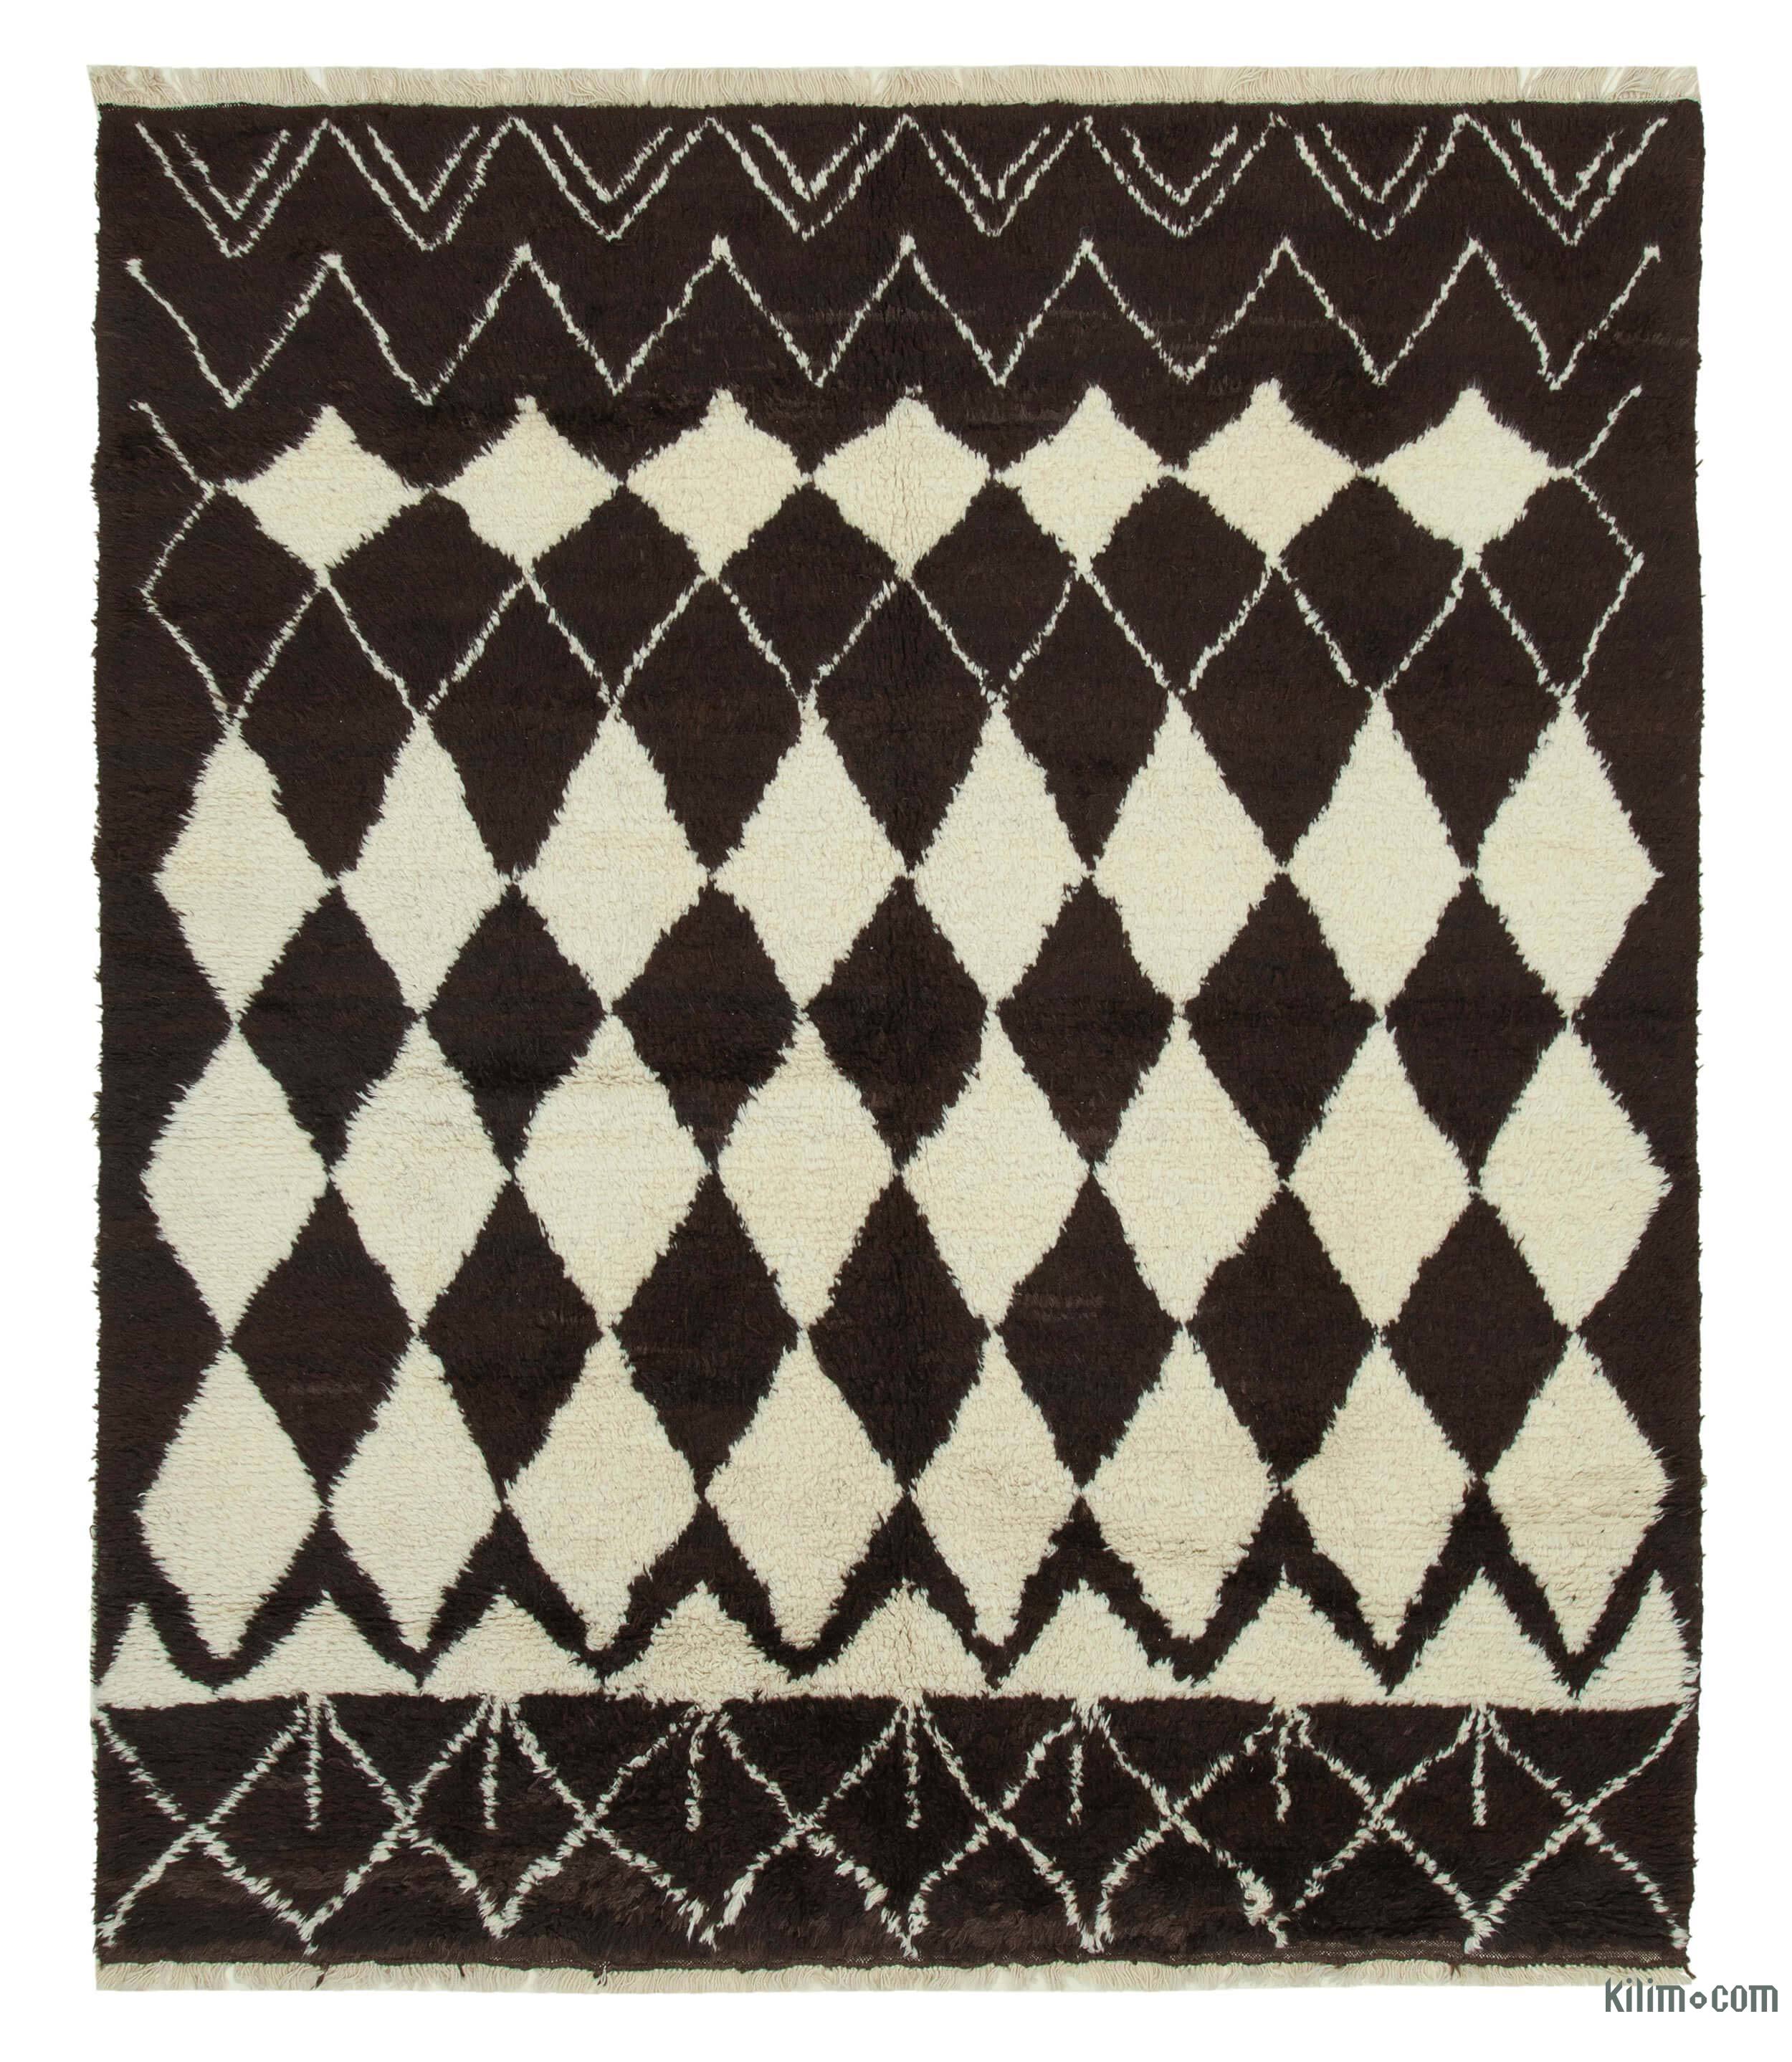 K0039285 Beige Moroccan Style Hand-Knotted Tulu - 7' 10" x 9' 2" (94 in. x 110 in.) | The Source for Vintage Rugs, Tribal Kilim Rugs, Wool Turkish Rugs, Overdyed Persian Rugs,